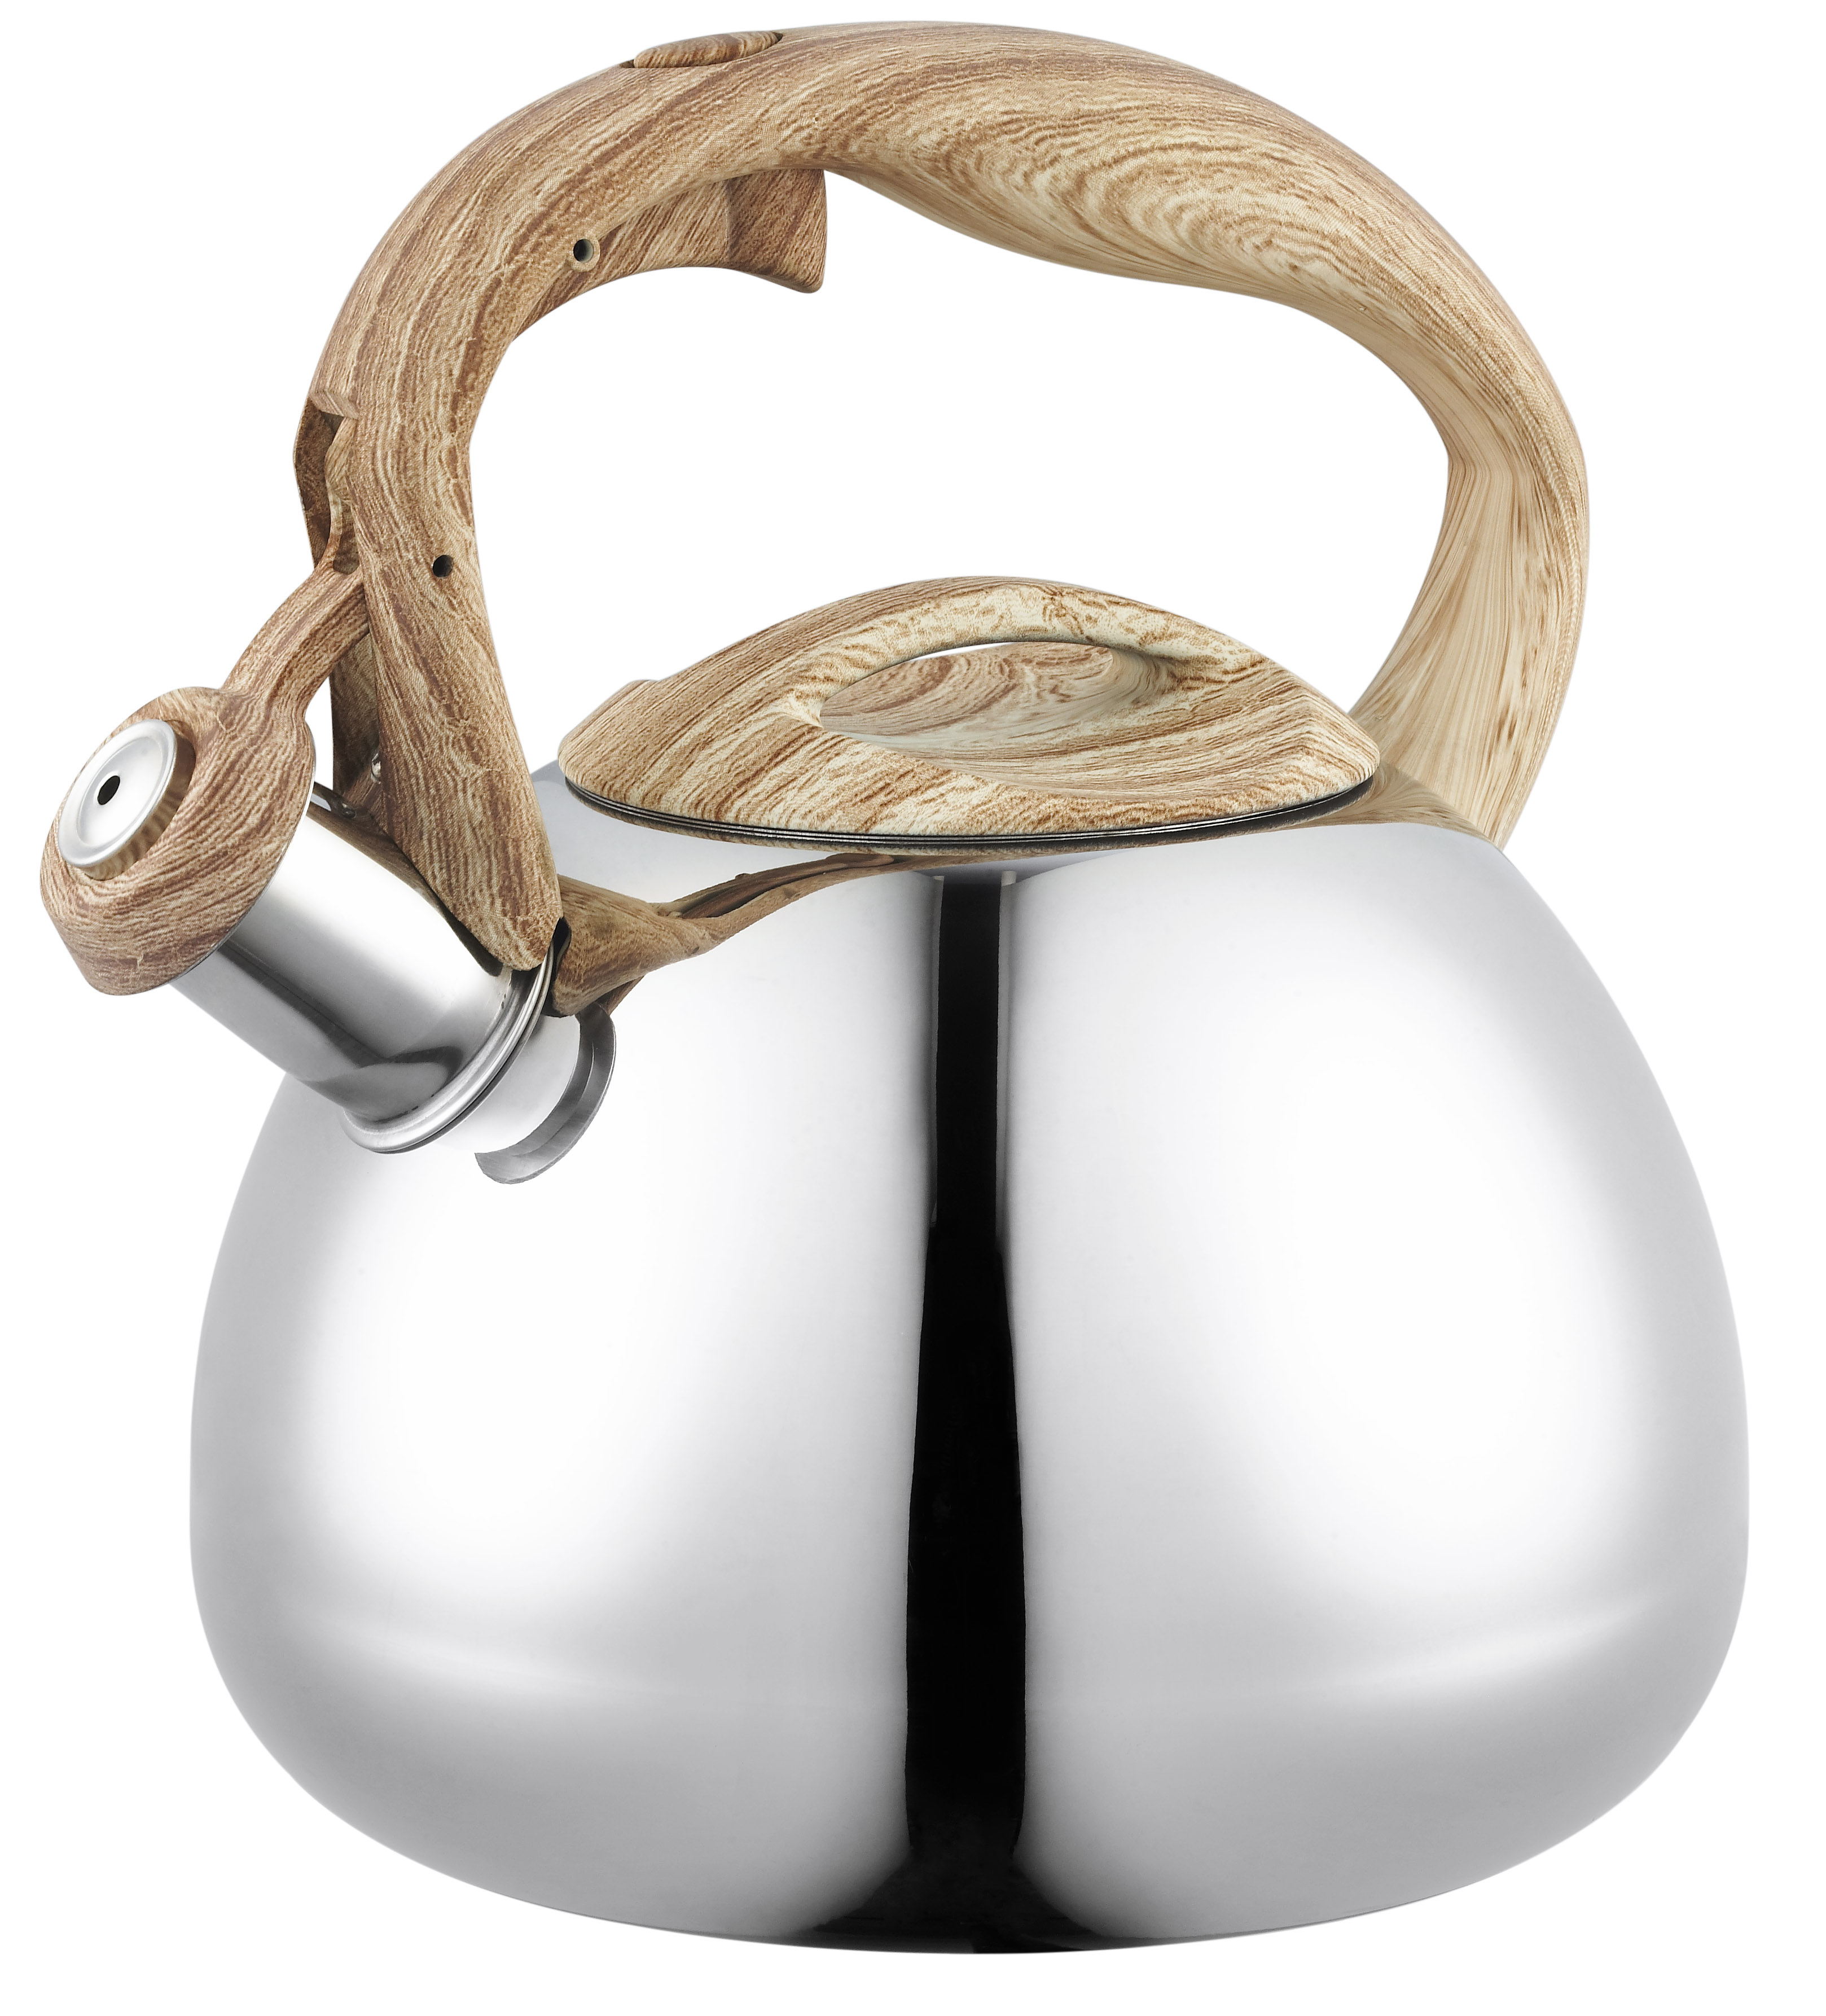 Buying a Stainless Steel Tea Kettle